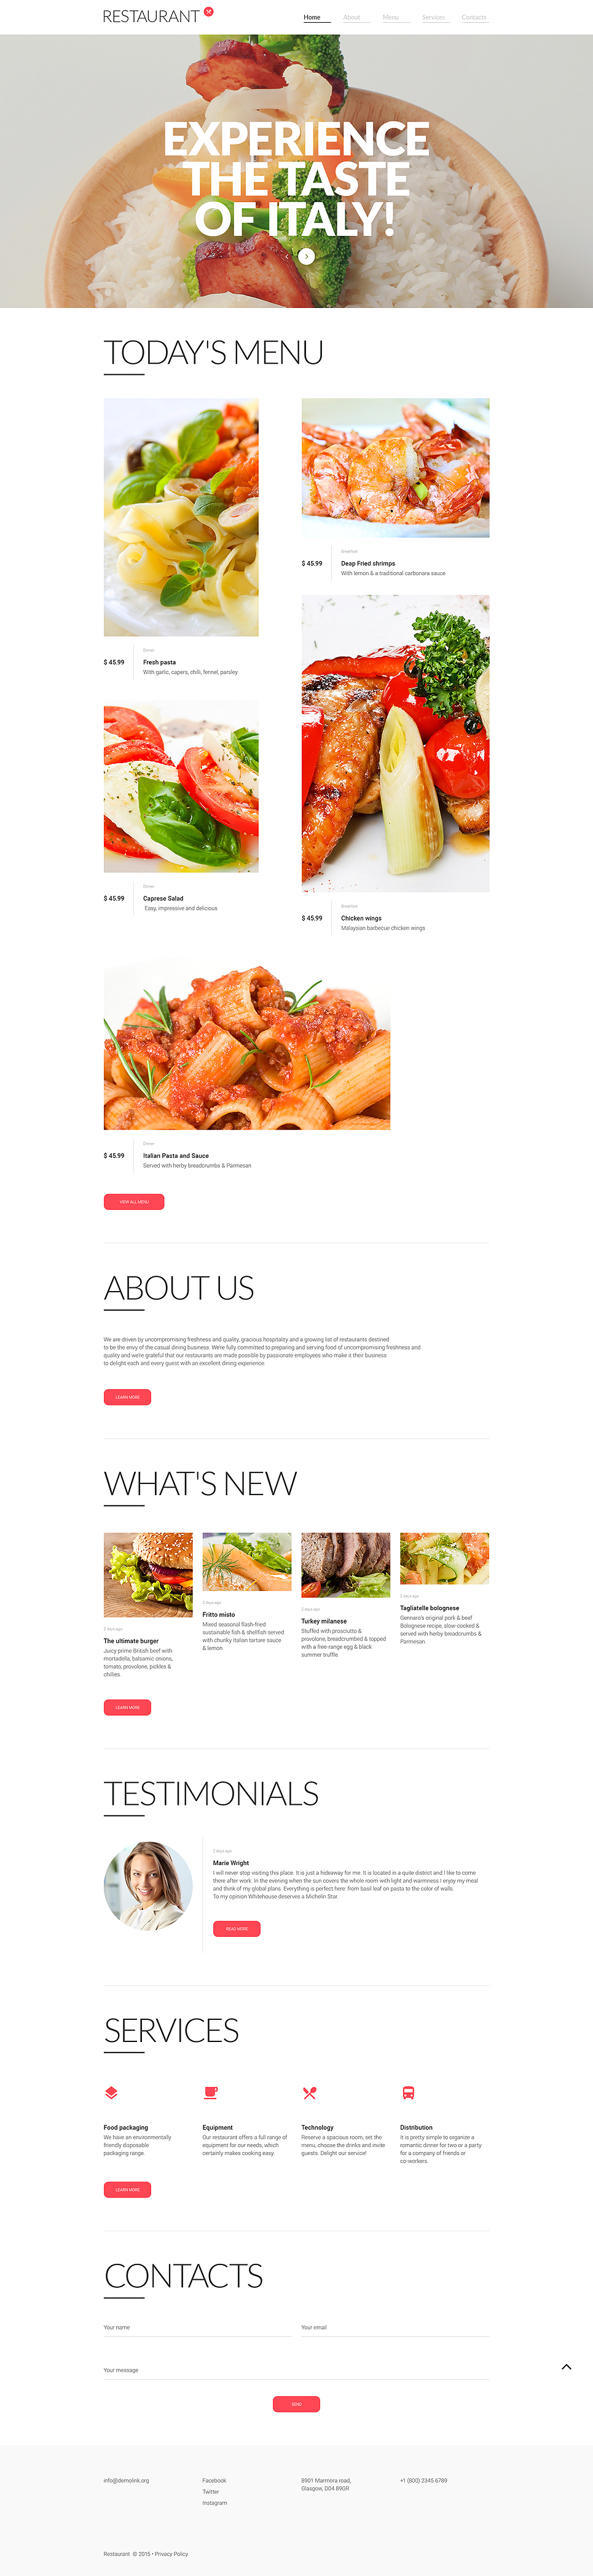 cafe-and-restaurant-responsive-website-template-57641